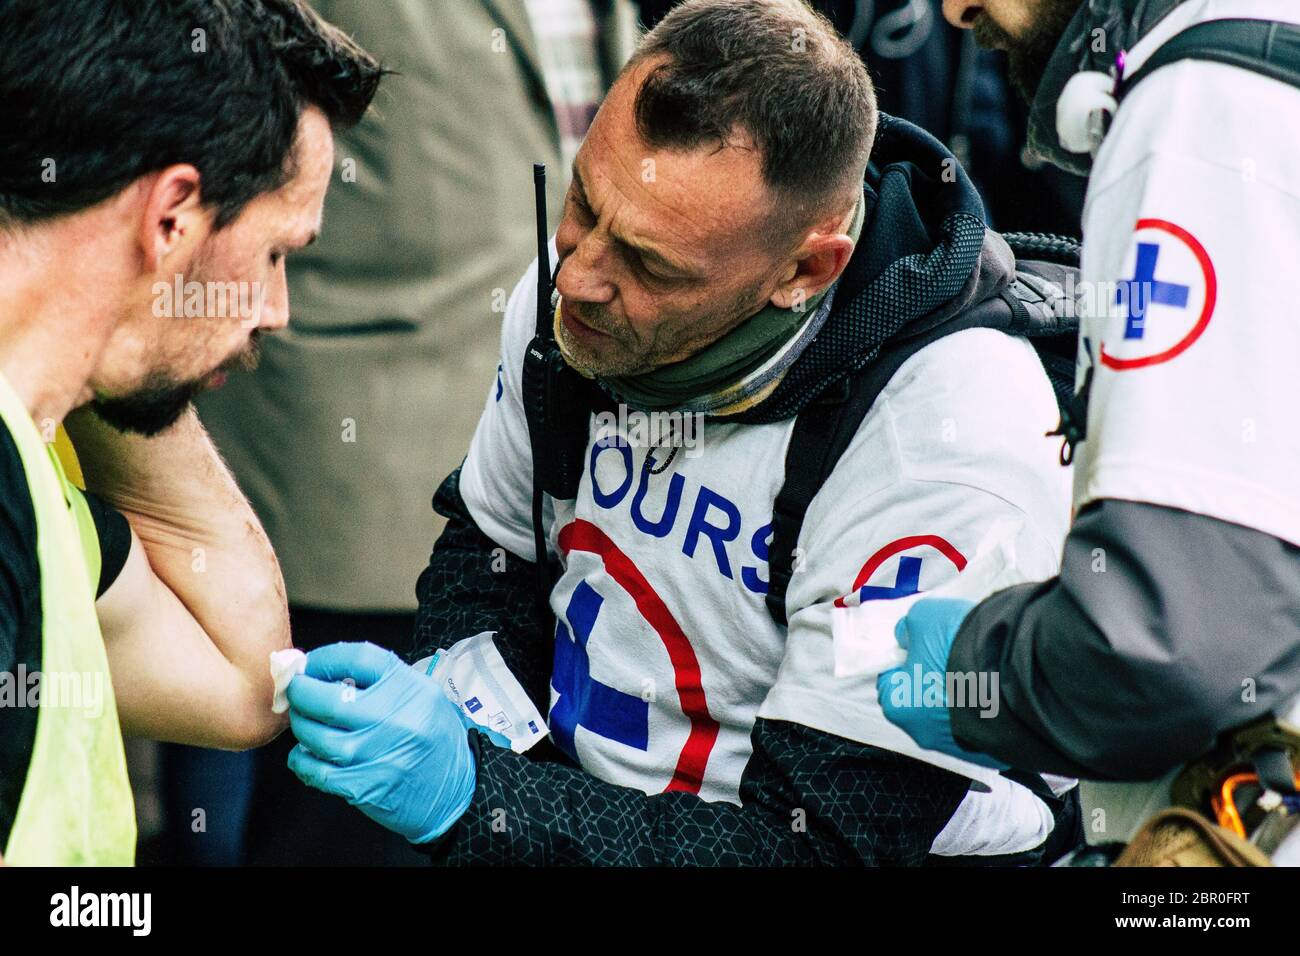 Paris France May 04, 2019 View of French street medic helping a protester injured by the riot squad of the French National Police in the street during Stock Photo